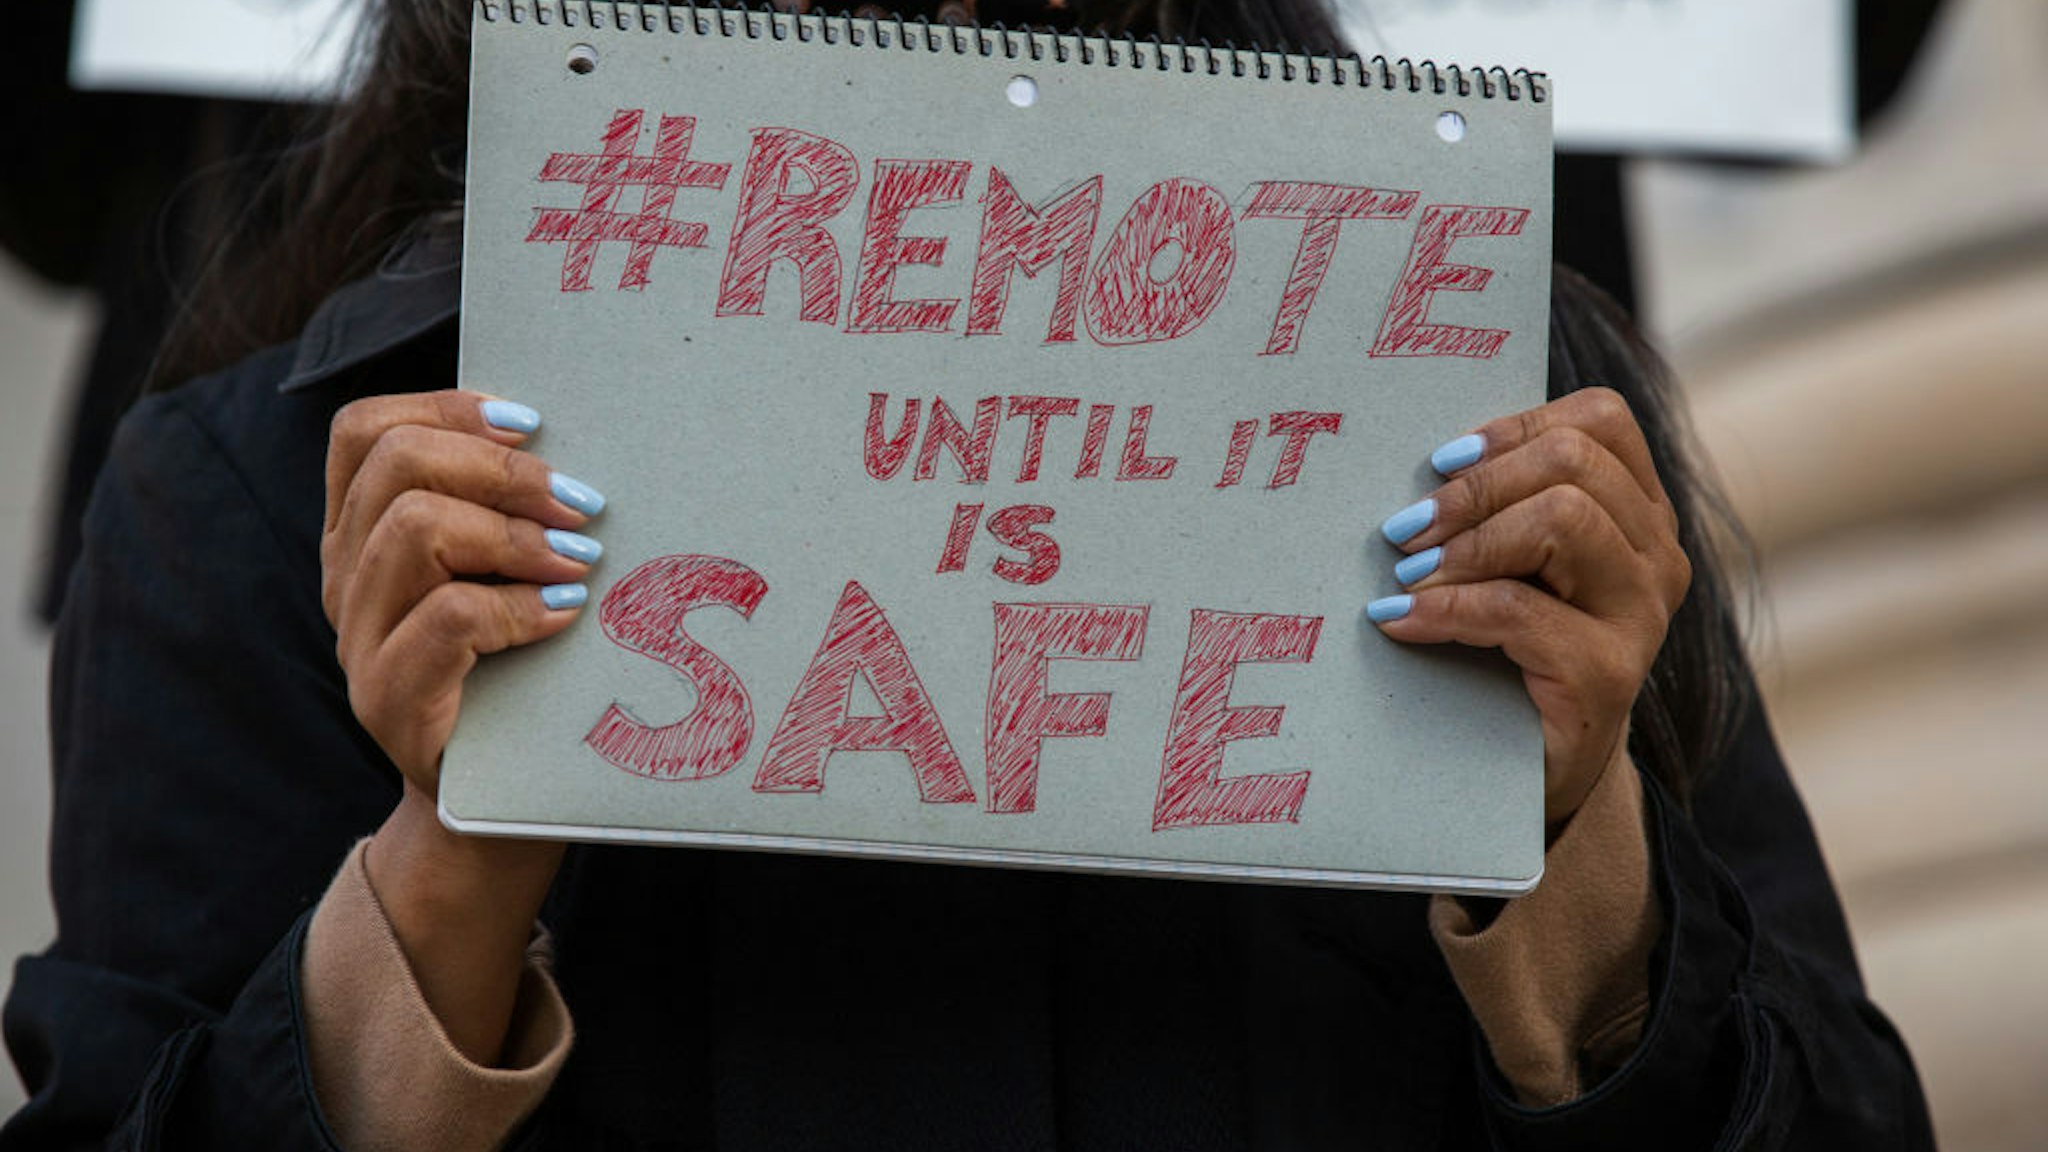 A demonstrator holds a sign reading "#Remote until it is safe" during a protest outside Brooklyn Borough Hall in the Brooklyn borough of New York, U.S. on Monday, Sept. 21, 2020.